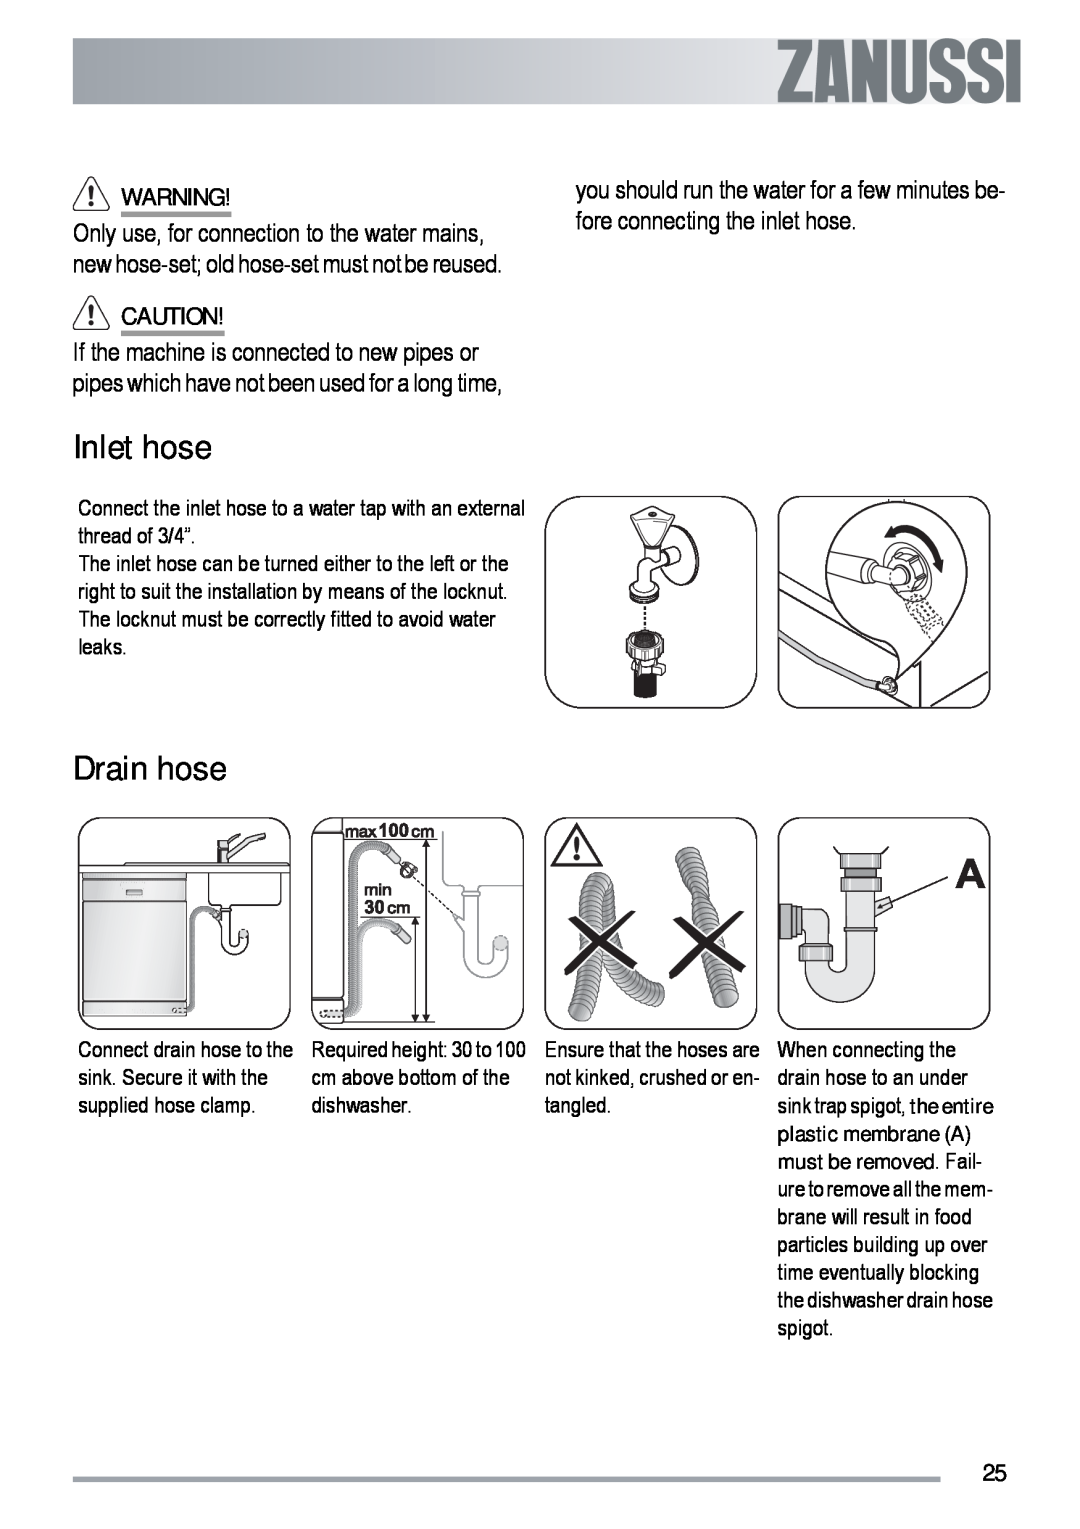 Zanussi ZDF 312 user manual Inlet hose, Drain hose, Connect the inlet hose to a water tap with an external thread of 3/4” 